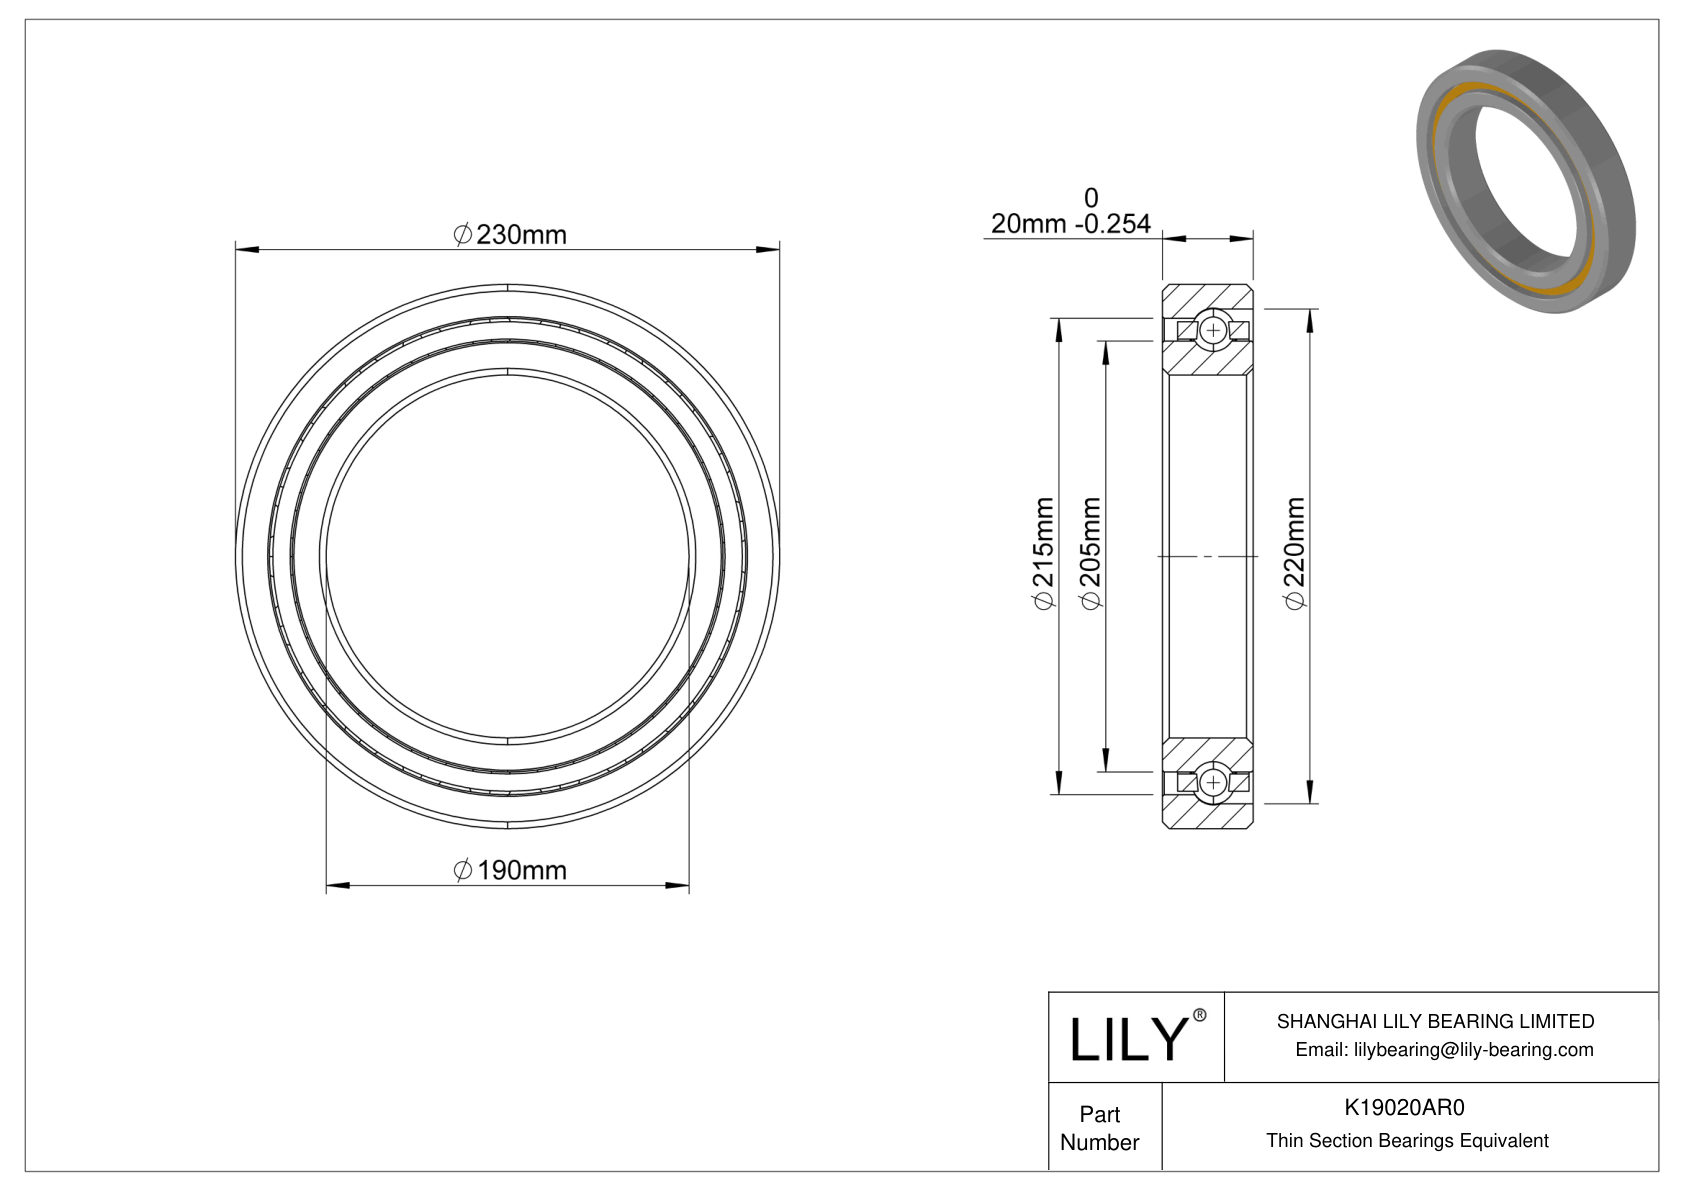 K19020AR0 Constant Section (CS) Bearings cad drawing